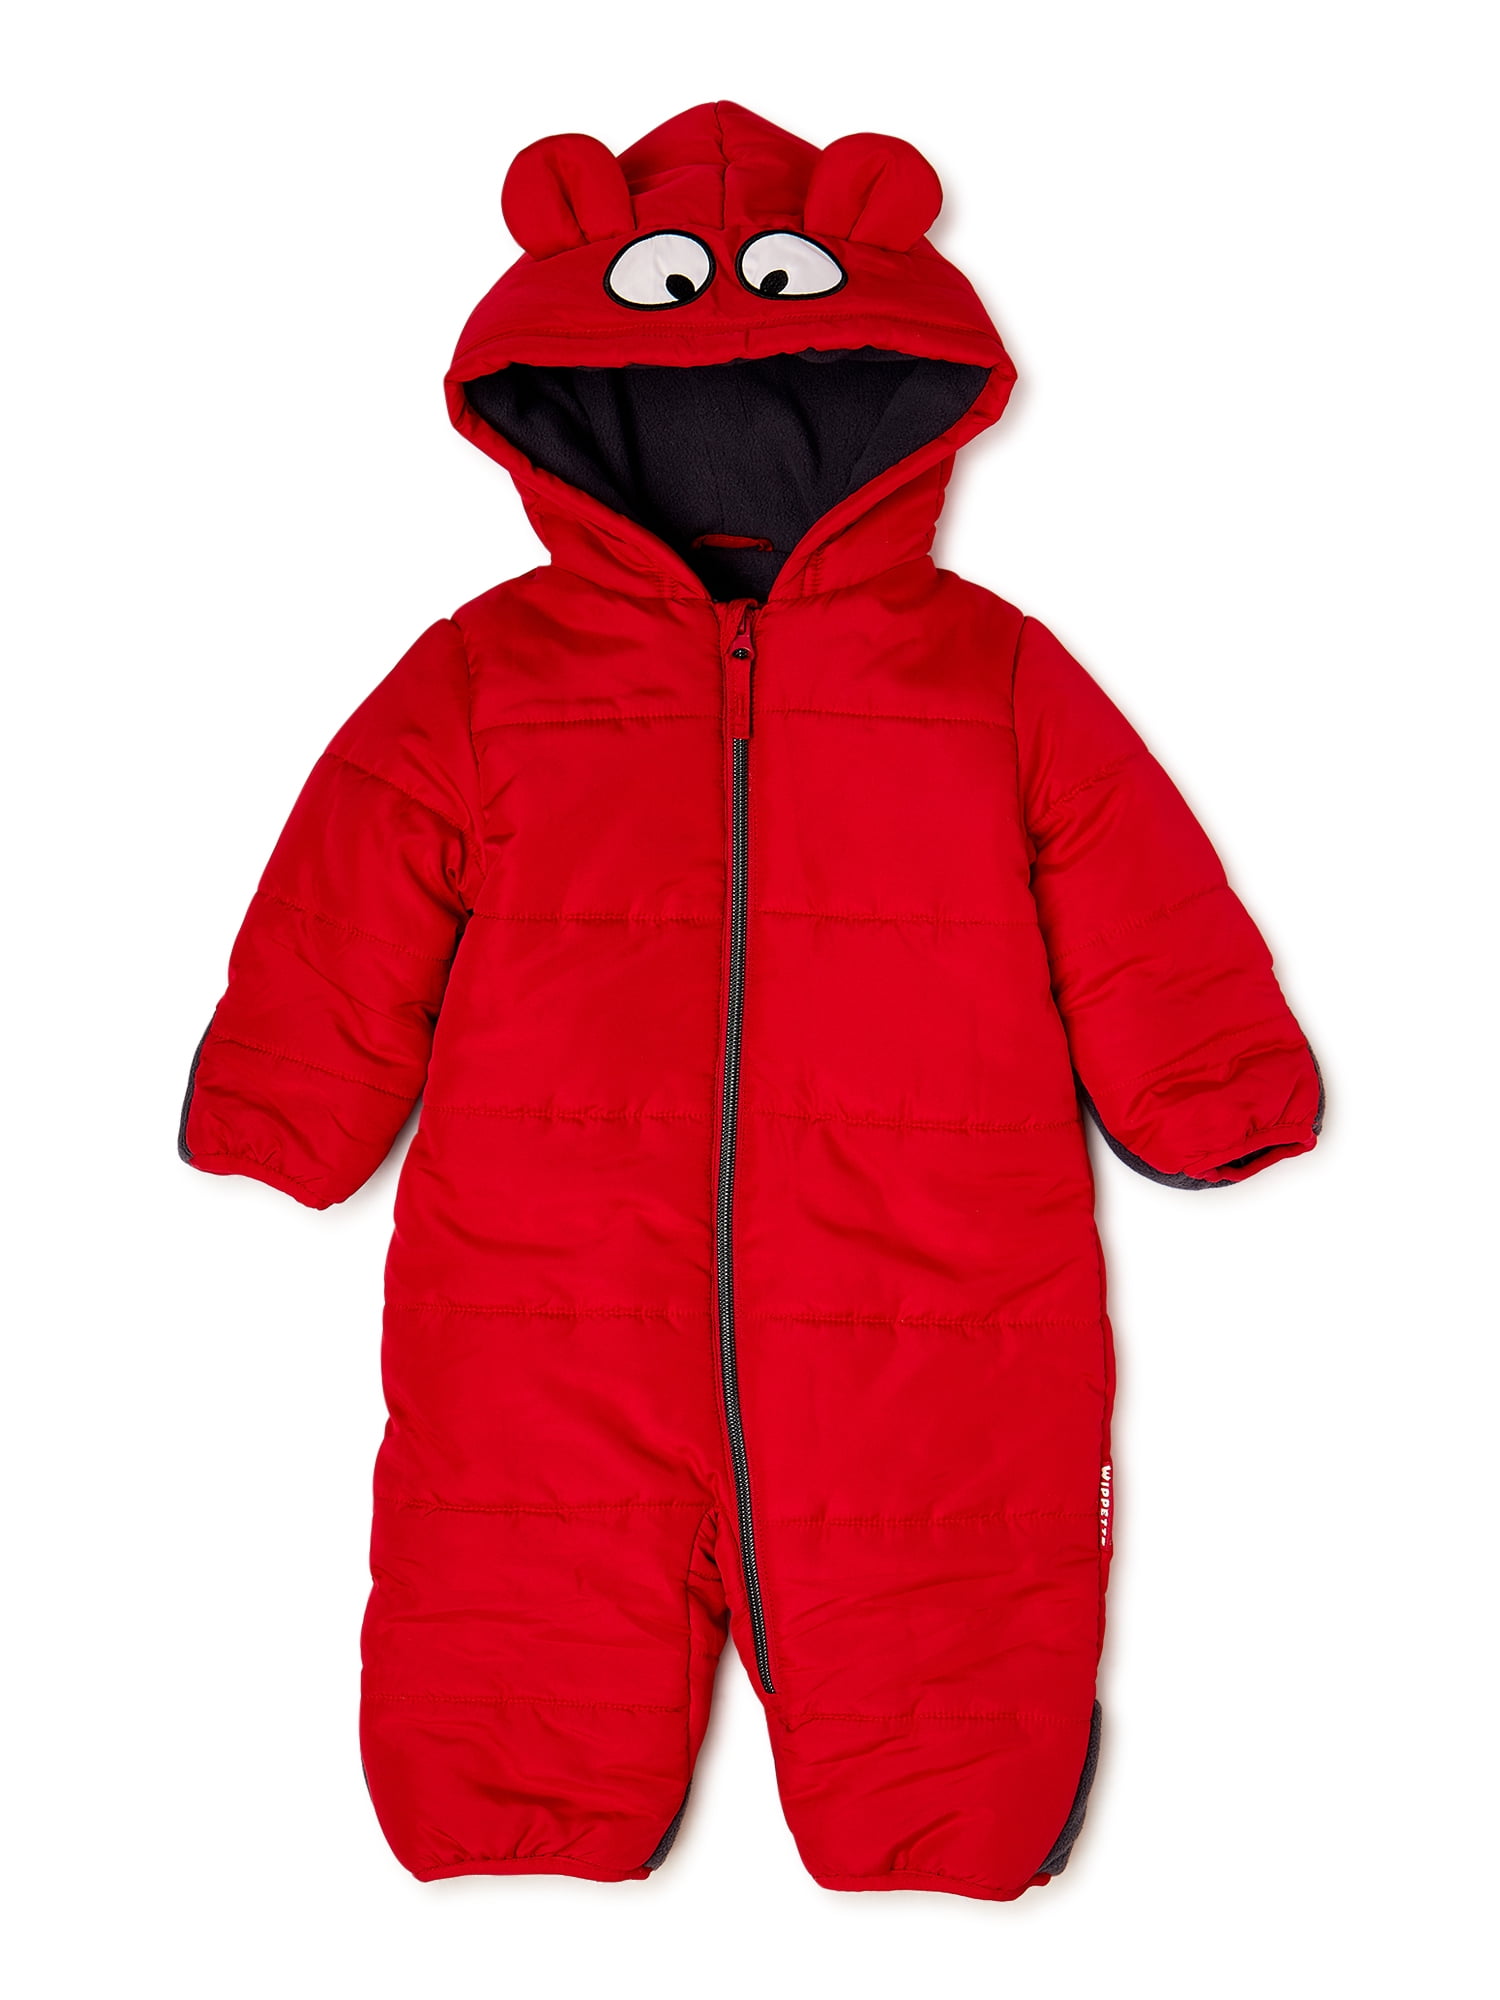 Wippette Baby Boys Quilted Bear Pram Snowsuit 